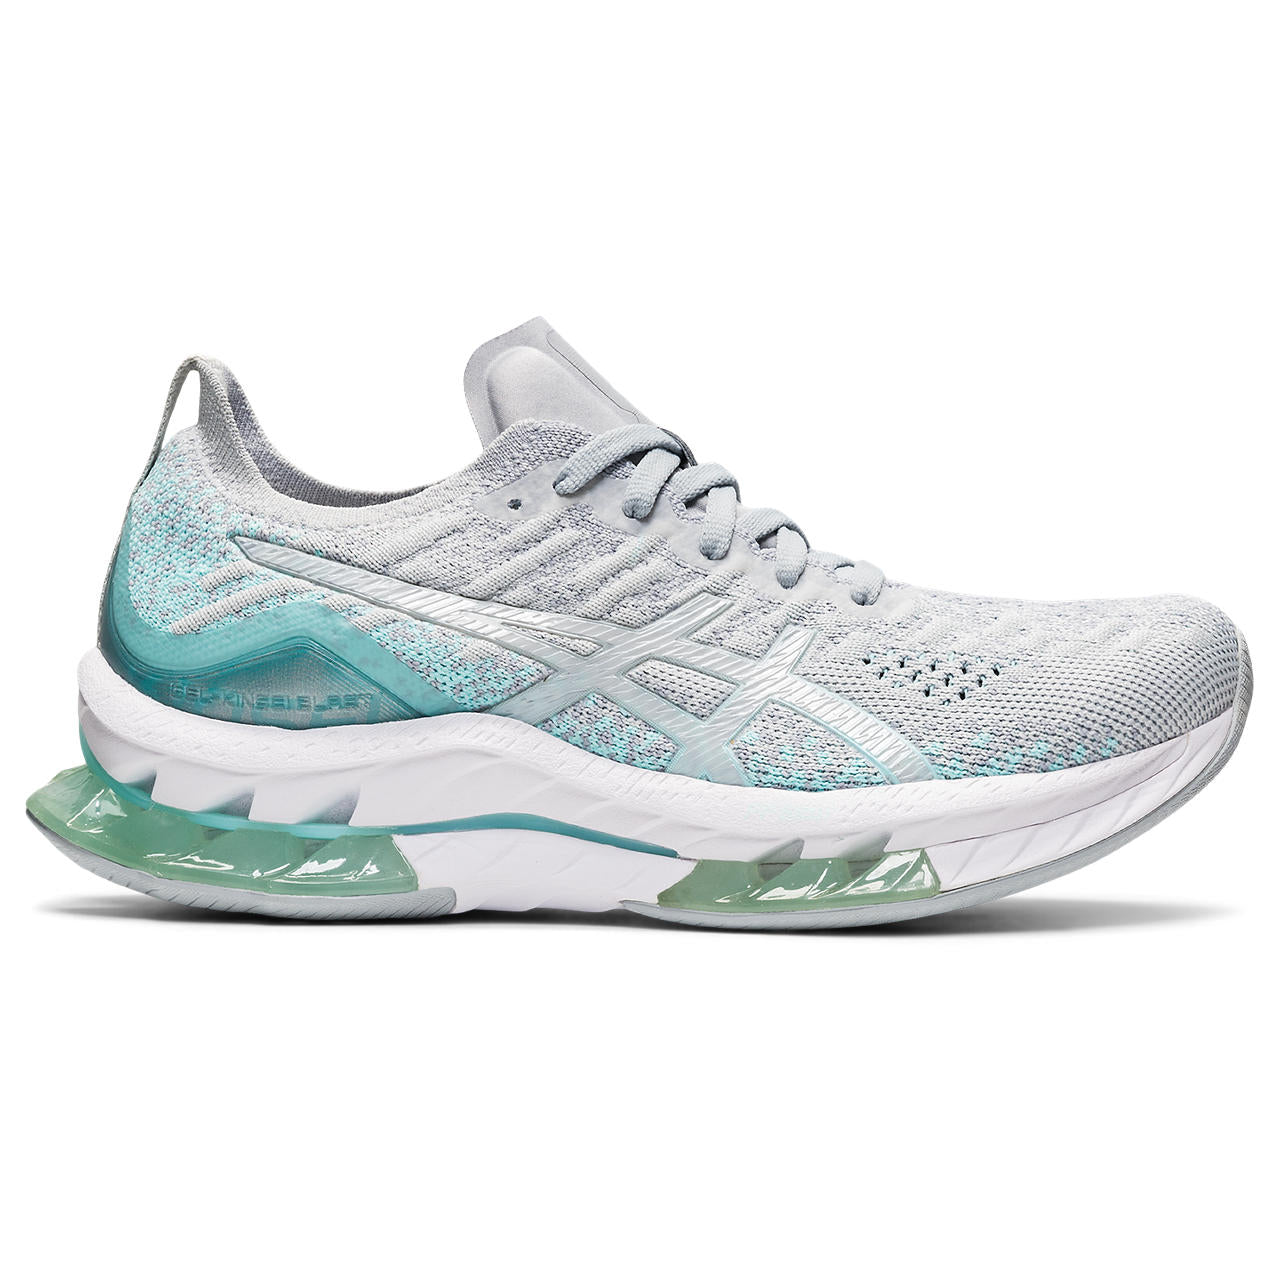 Lateral view of the Women's Kinsei Blast by ASIC in the color Glacier Grey/Piedmont Grey